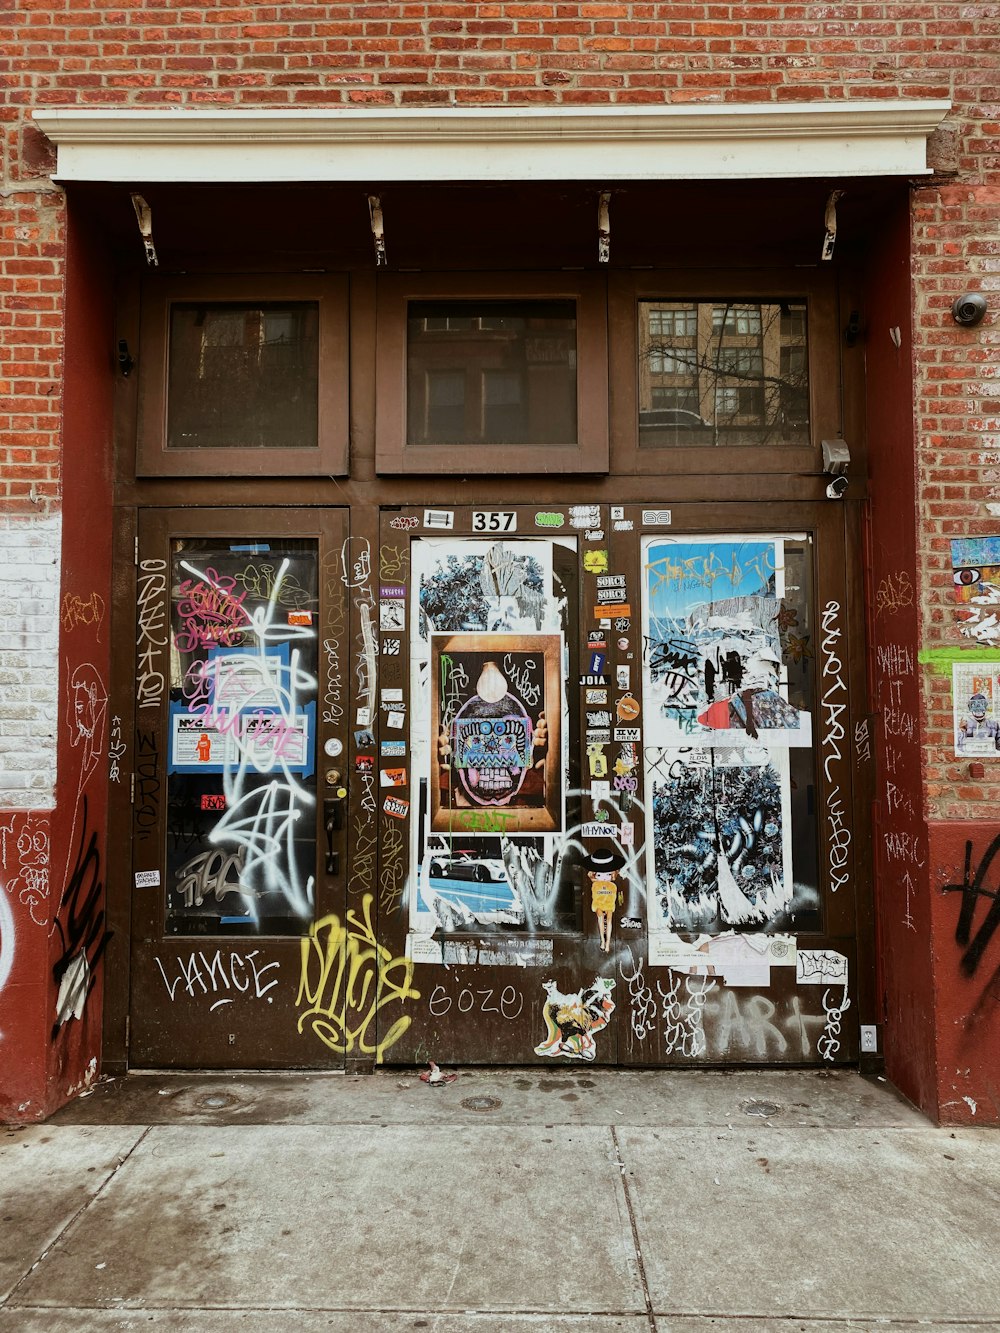 a door with graffiti on it in front of a brick building